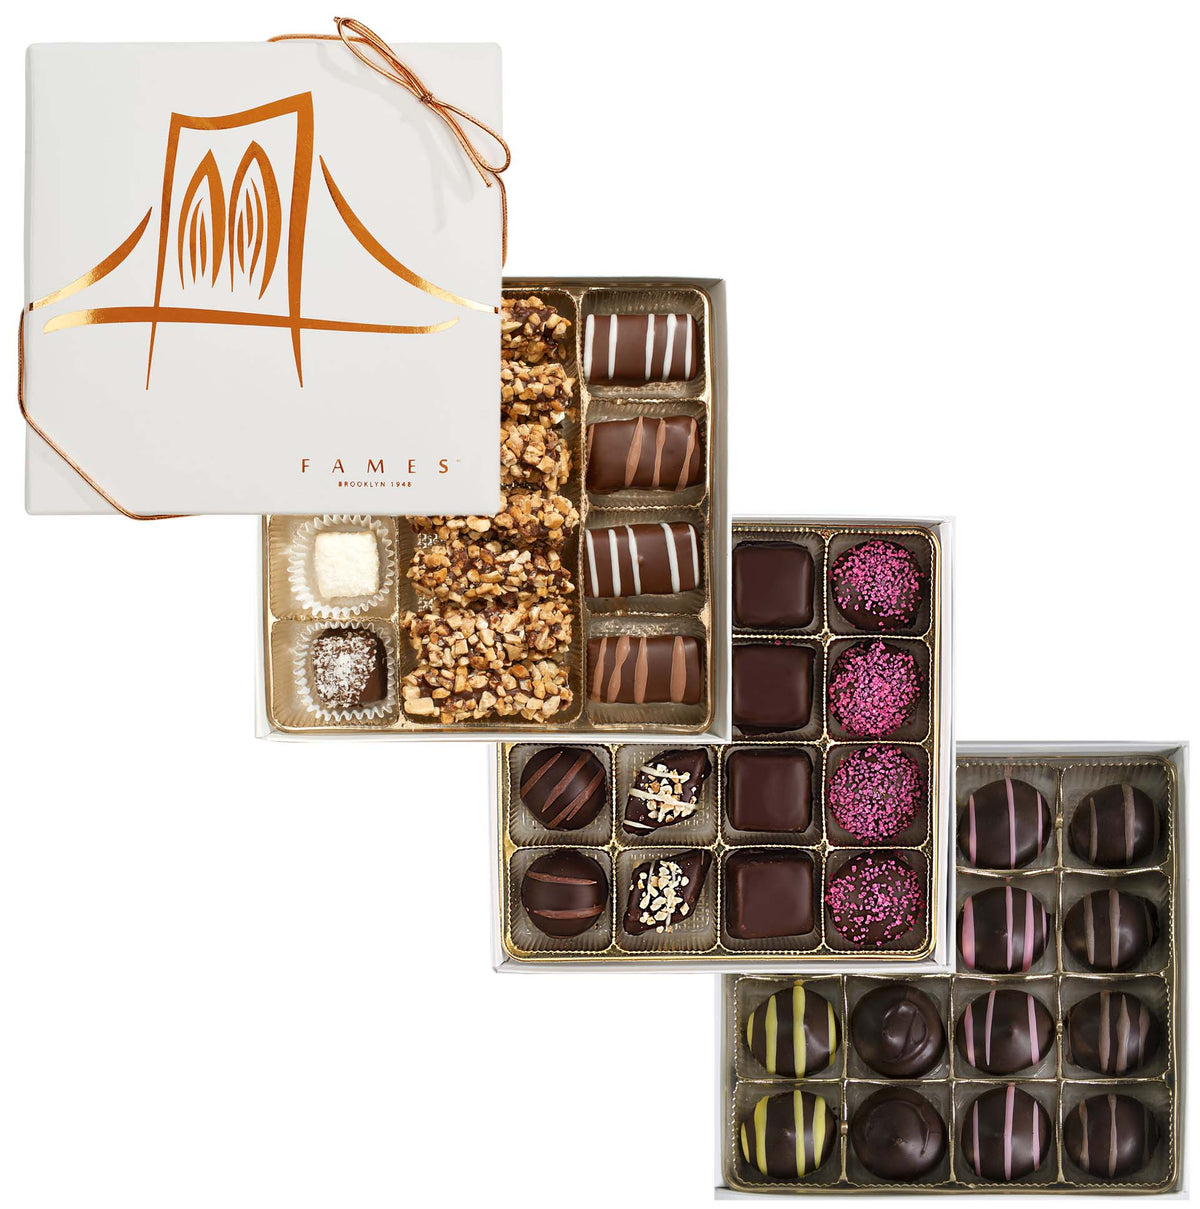 3 Artisan Crafted Chocolate Gift Boxes